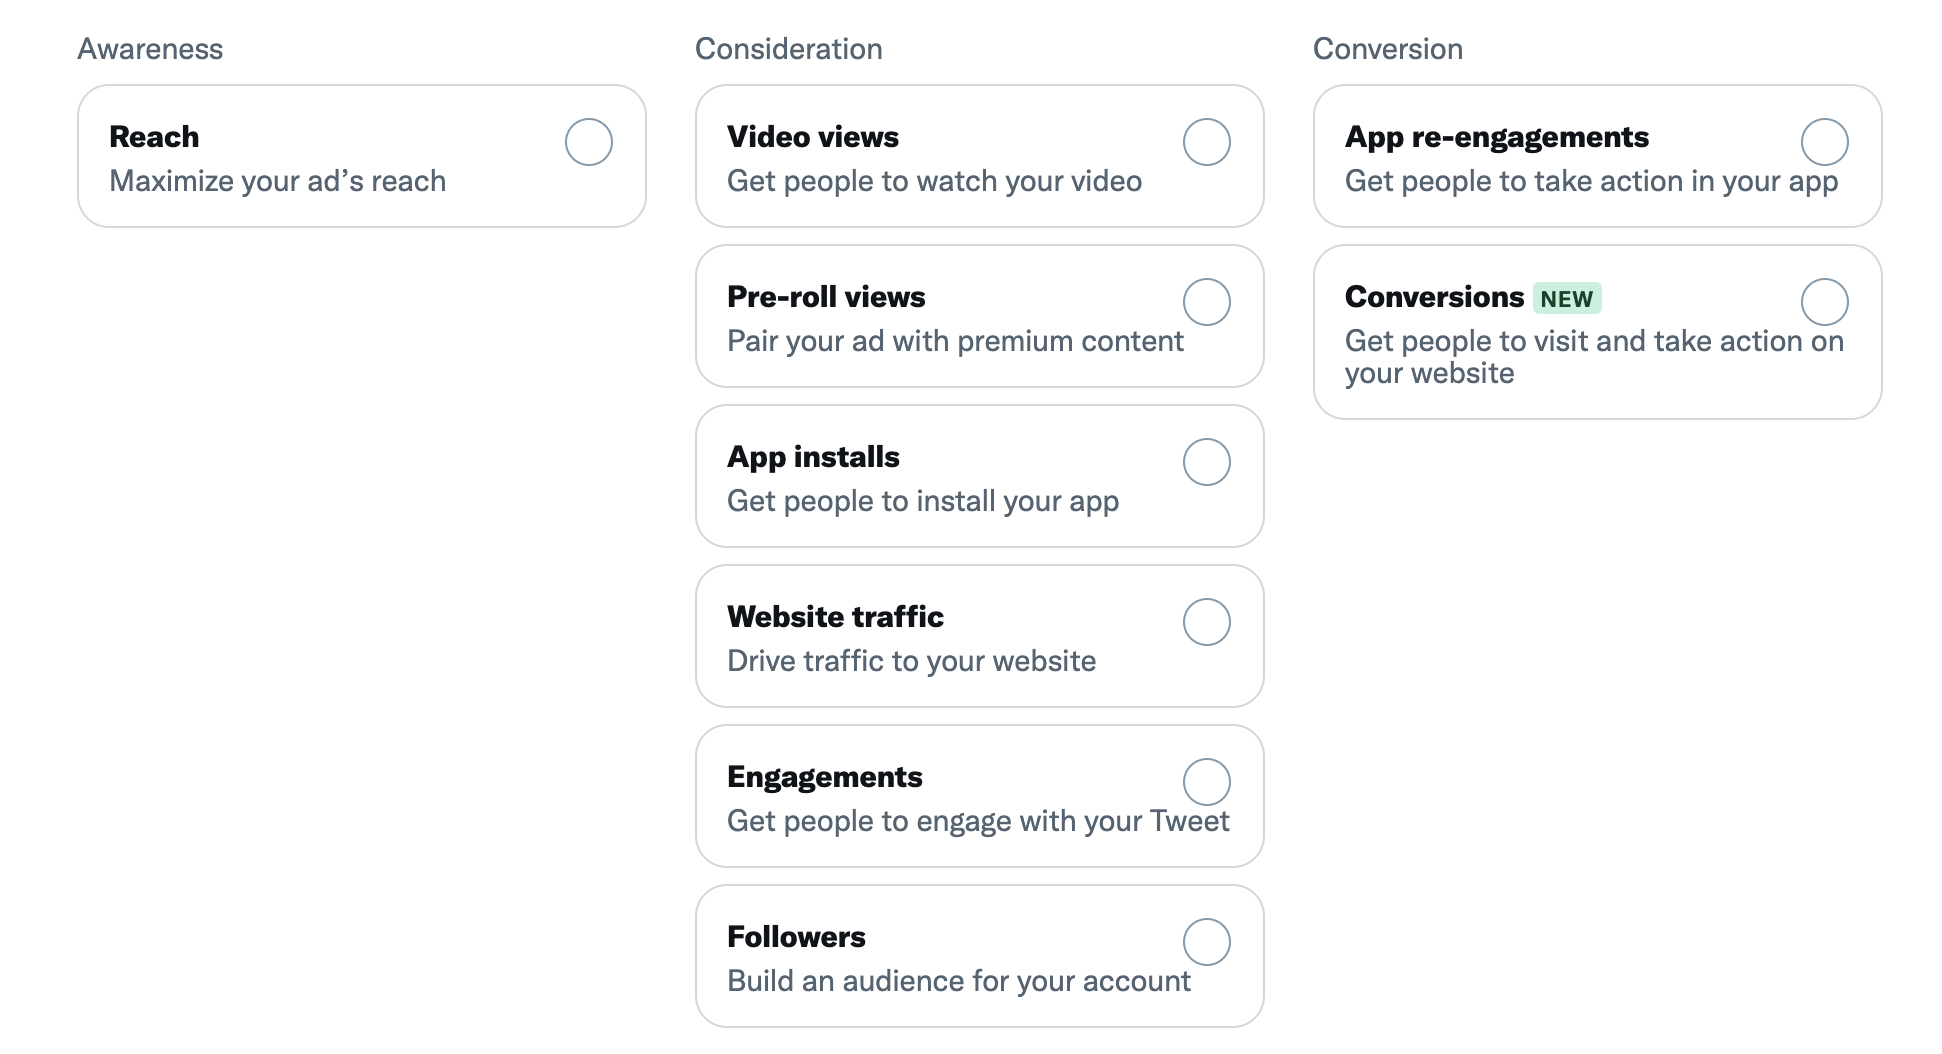 A screenshot of the Twitter ad interface's campaign objective page that shows multiple options under three broader categories: Awareness, Consideration and Conversion.